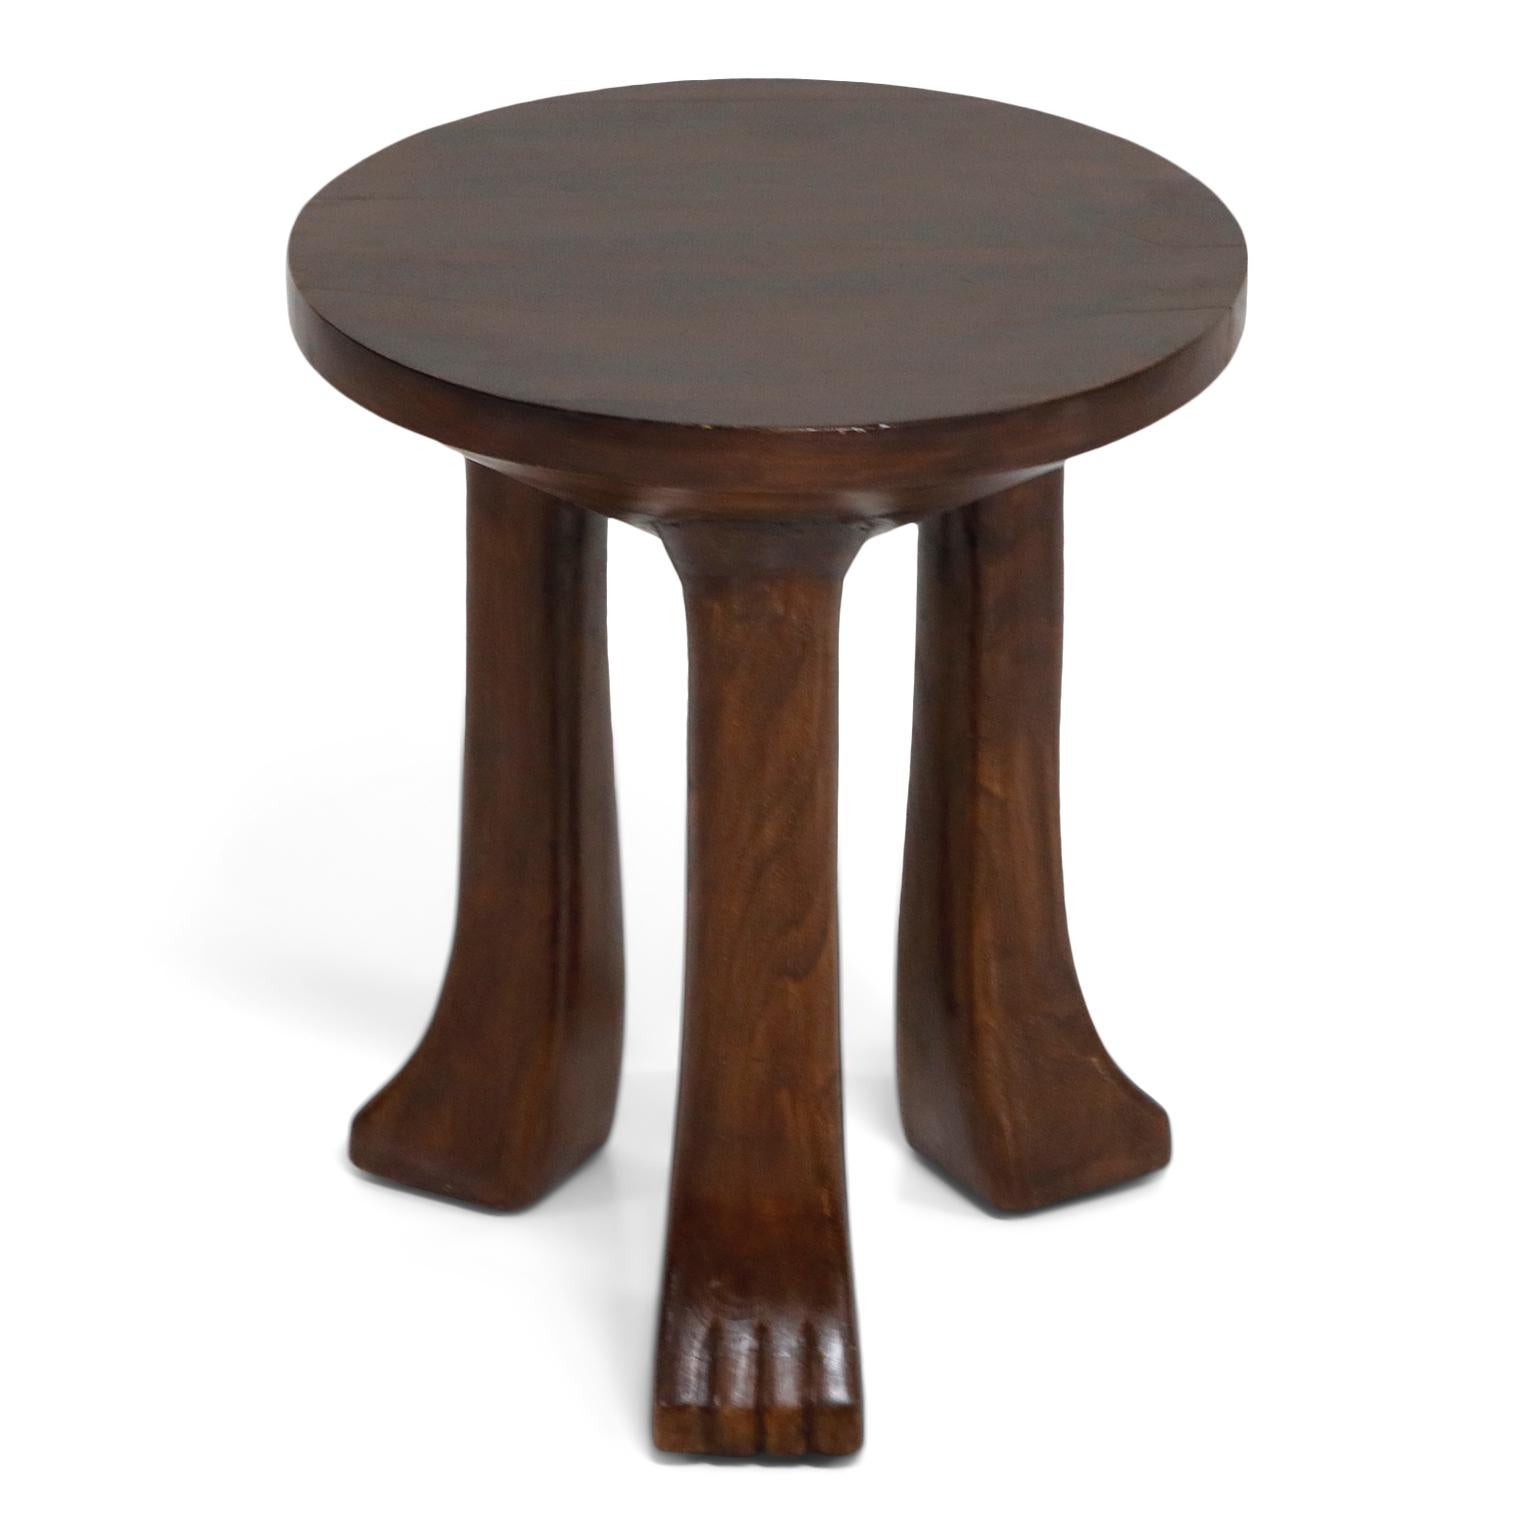 Carved Teak Three-Legged Lionfoot Stools in the Style of John Dickinson 1